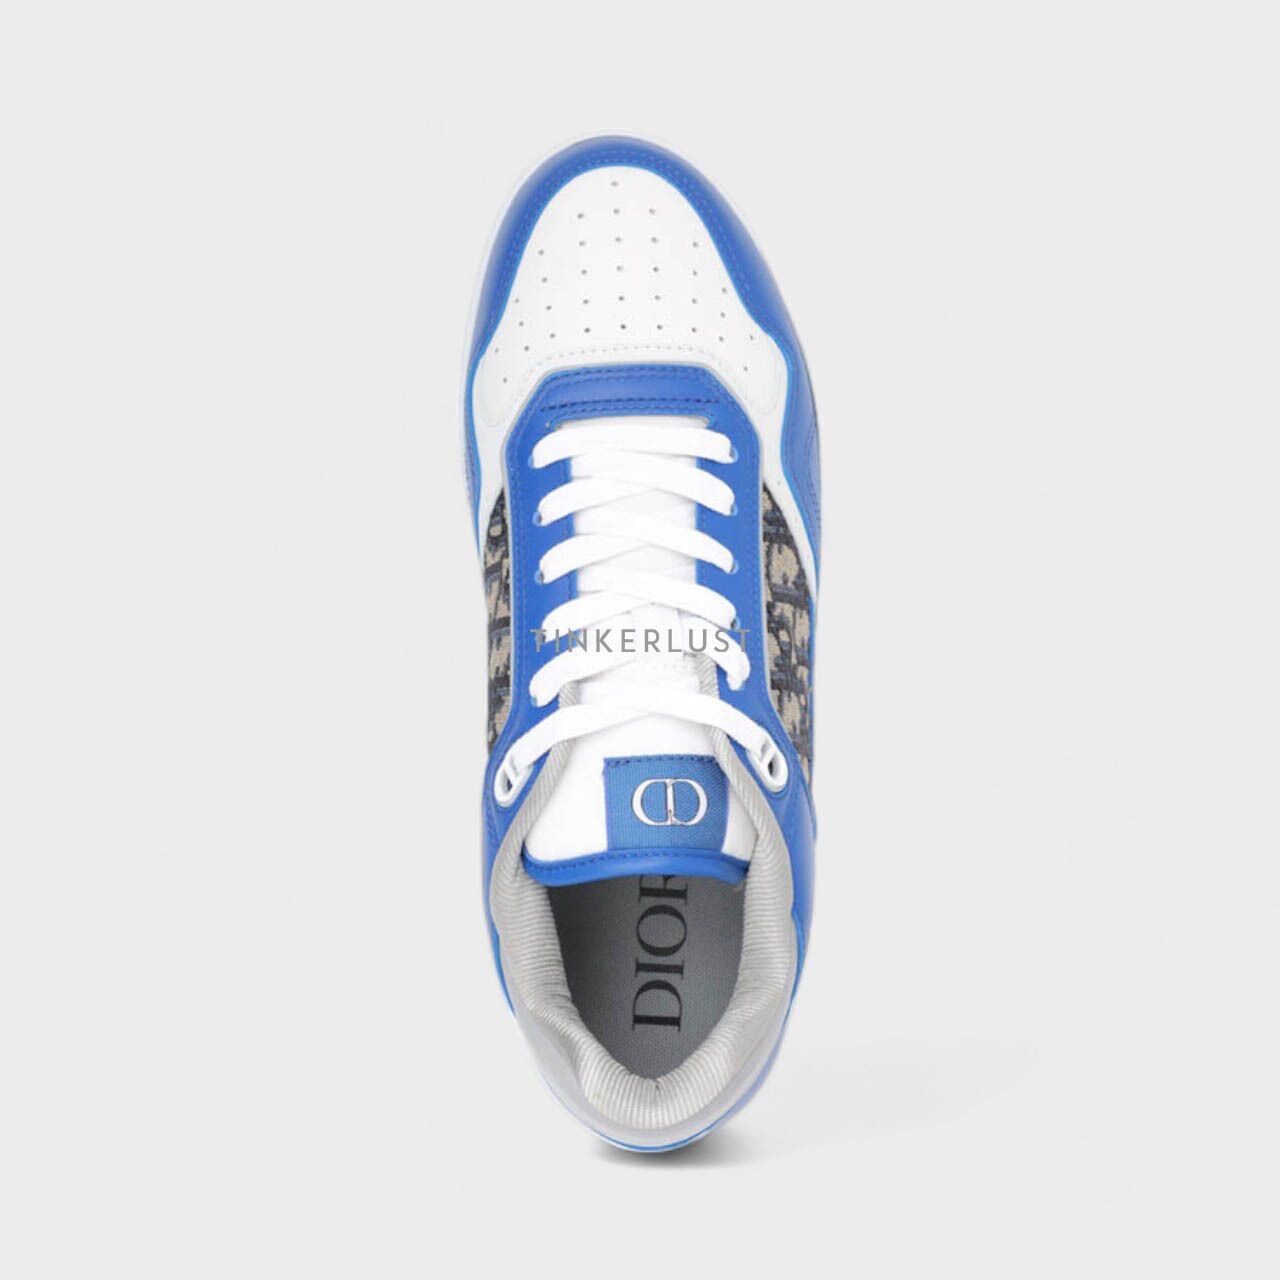 Christian Dior B27 Oblique Low Top Blue/Gray/White Sneakers